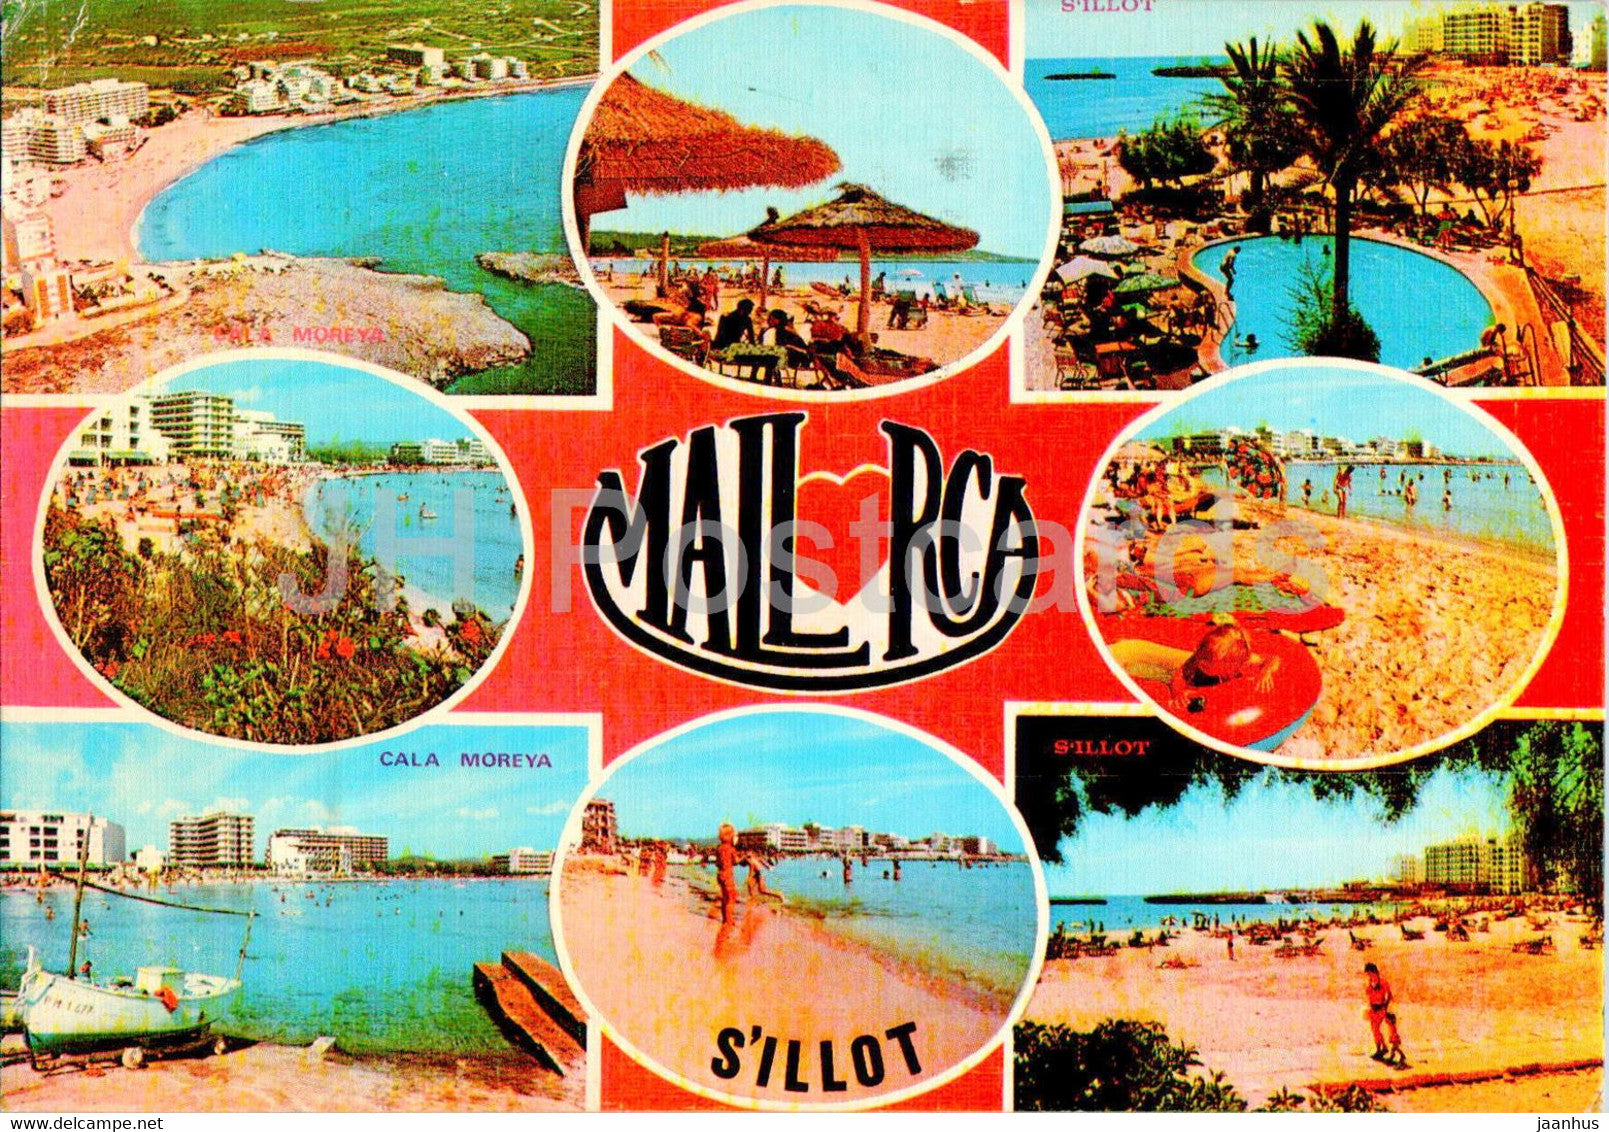 S'illot - Mallorca - multiview - 2580 - Spain - used - JH Postcards